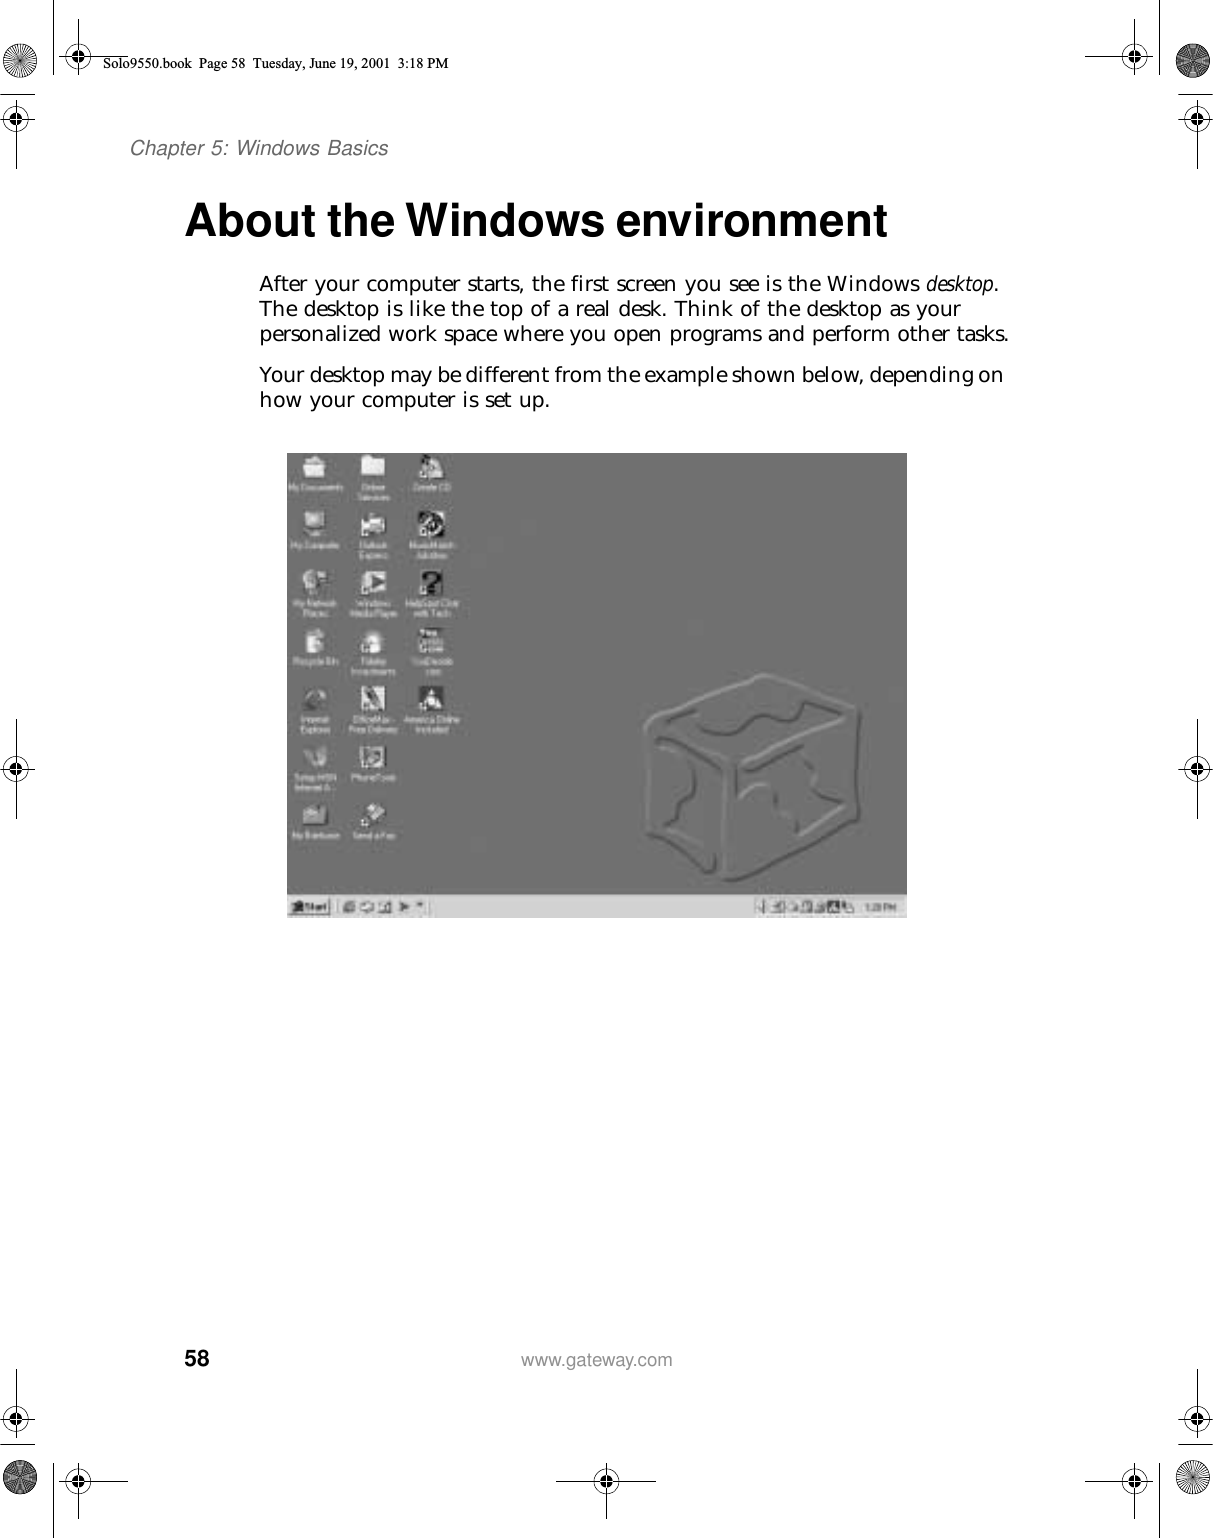 58Chapter 5: Windows Basicswww.gateway.comAbout the Windows environmentAfter your computer starts, the first screen you see is the Windows desktop. The desktop is like the top of a real desk. Think of the desktop as your personalized work space where you open programs and perform other tasks.Your desktop may be different from the example shown below, depending on how your computer is set up.Solo9550.book Page 58 Tuesday, June 19, 2001 3:18 PM